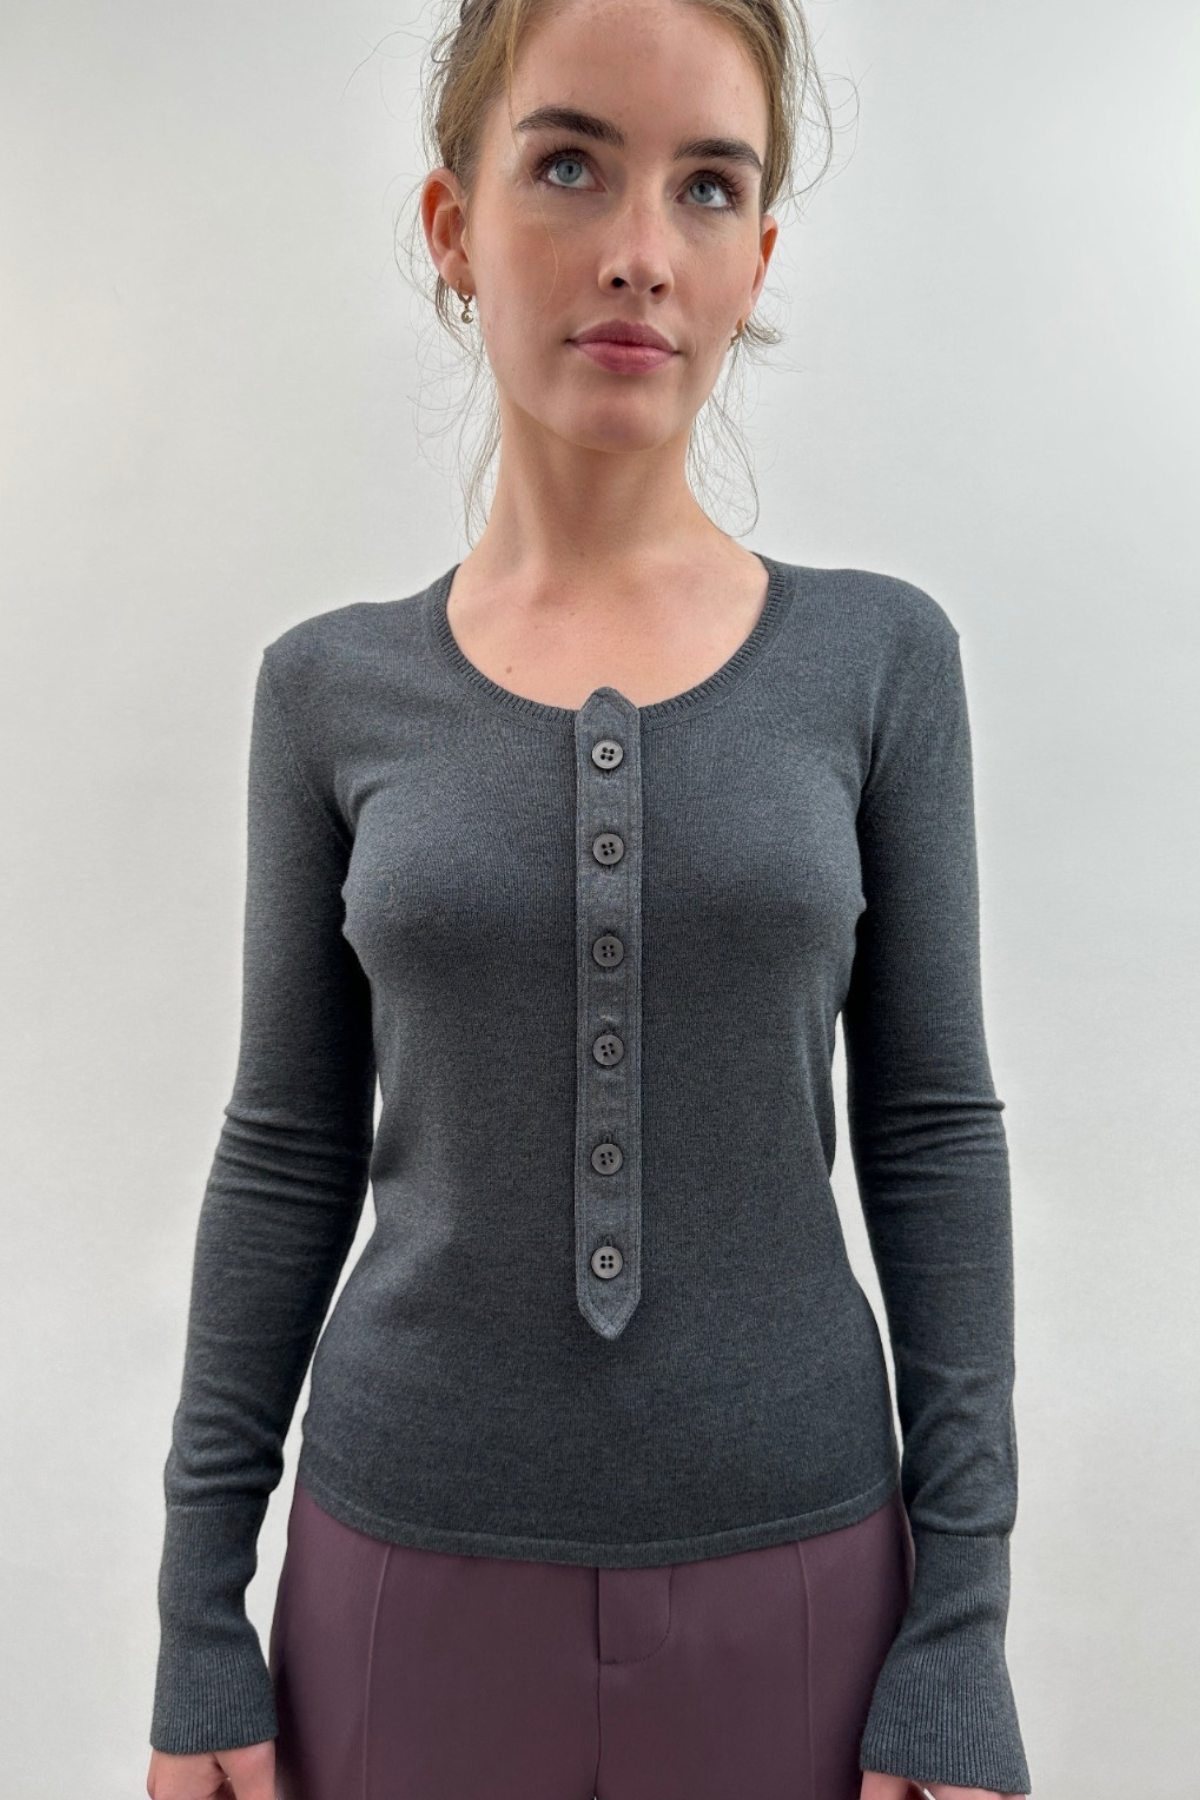 bay knit top with front placket and buttons